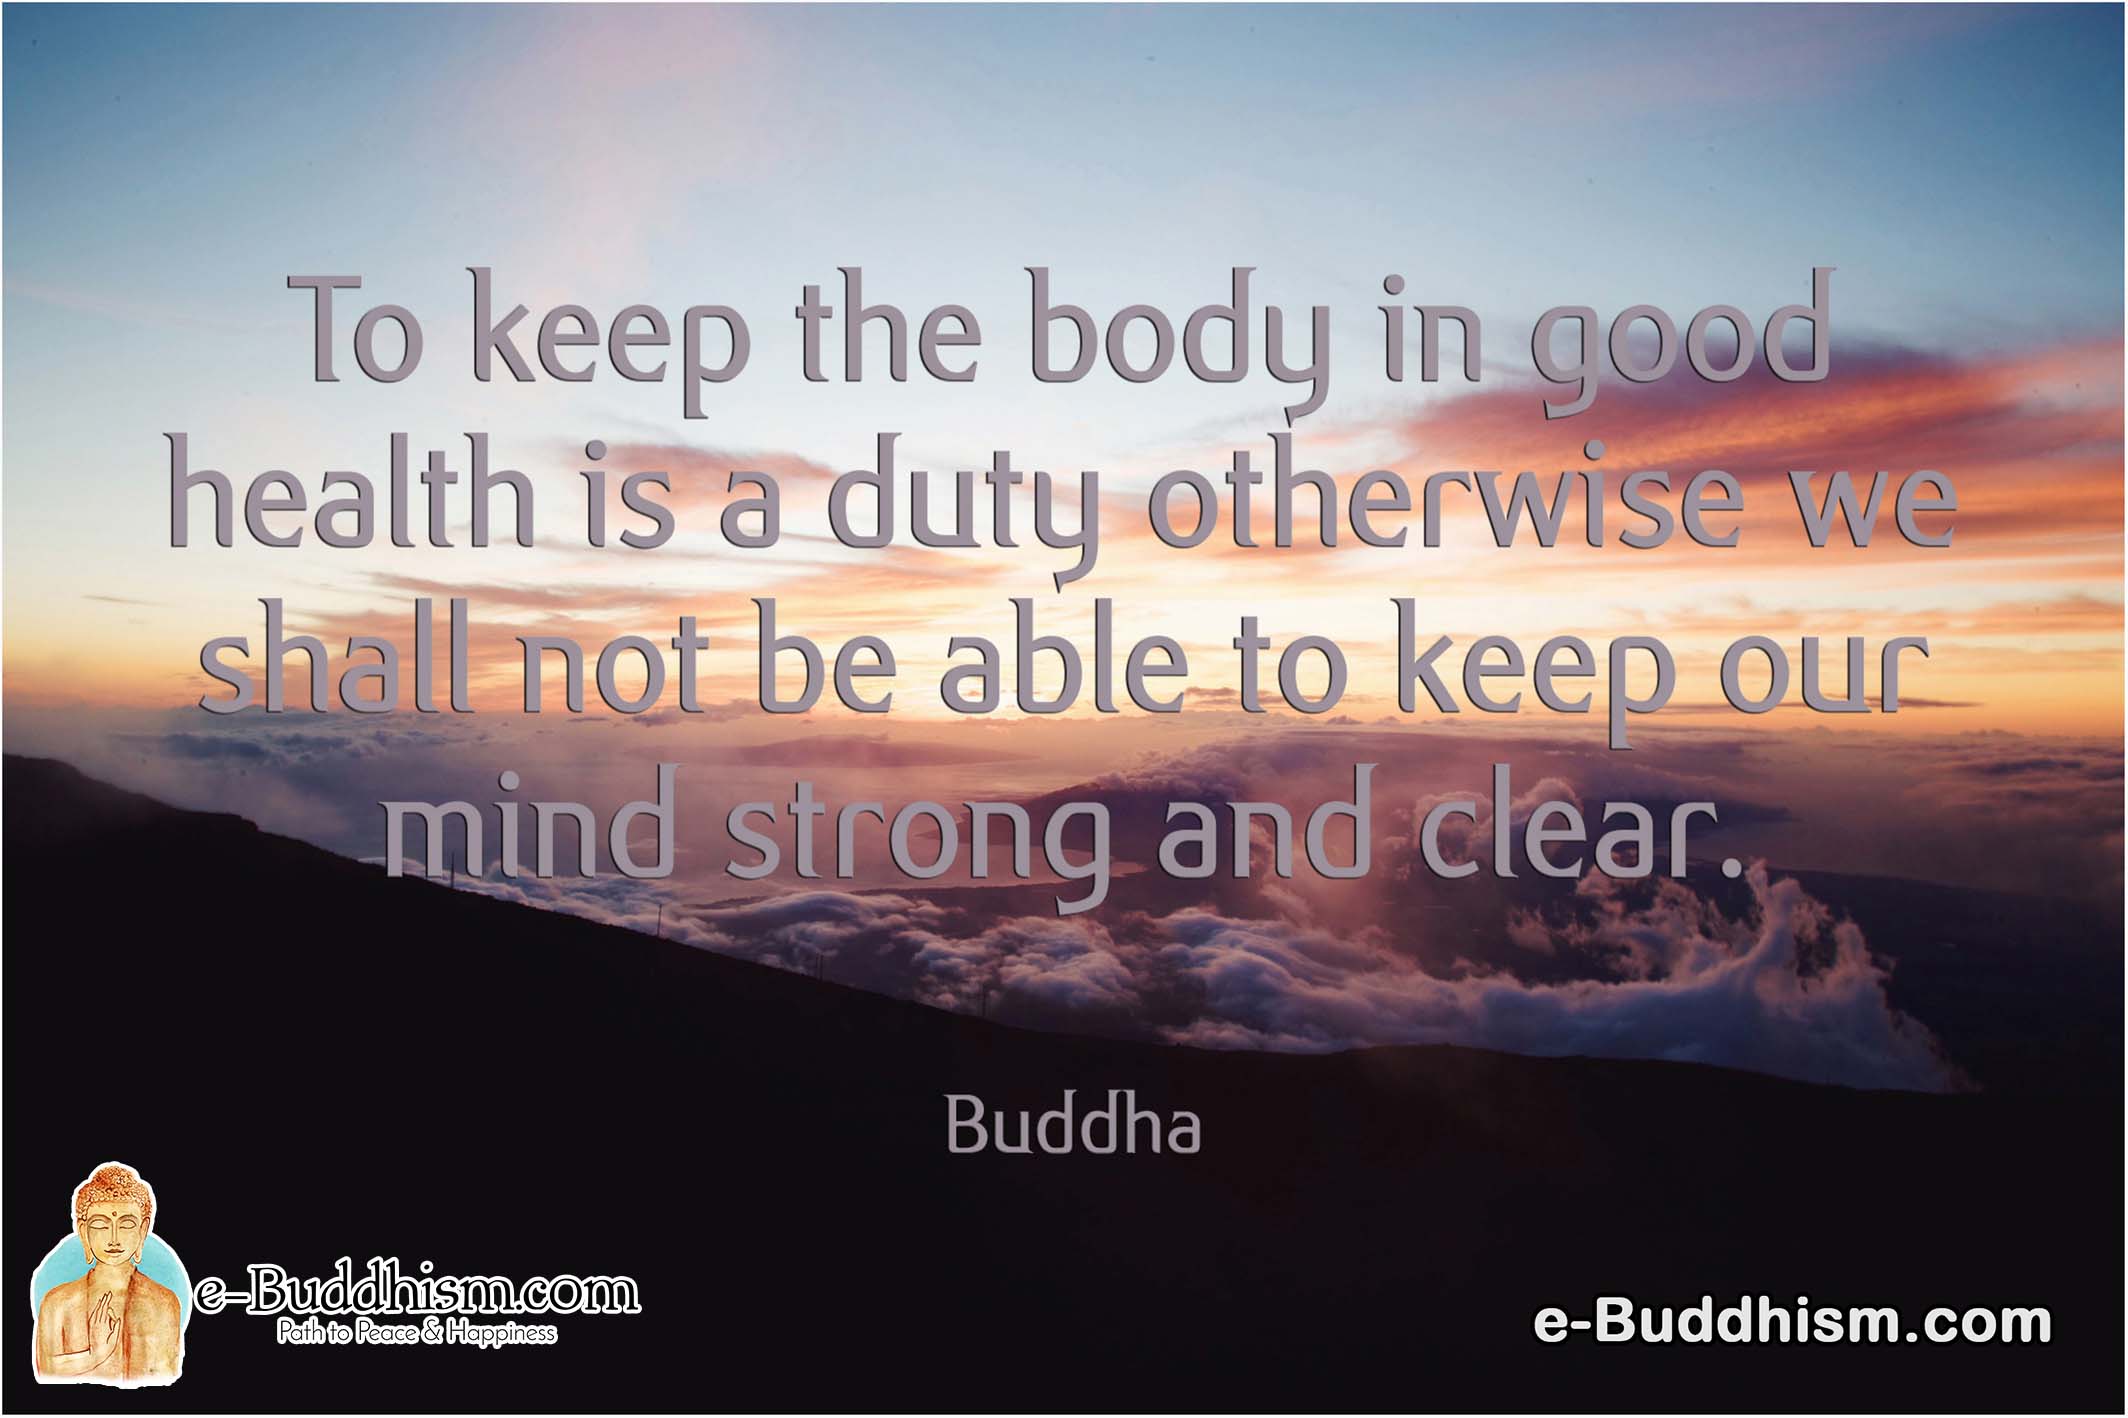 To keep the body in good health is a duty otherwise we shall not be able to keep our minds strong and clear. -Buddha